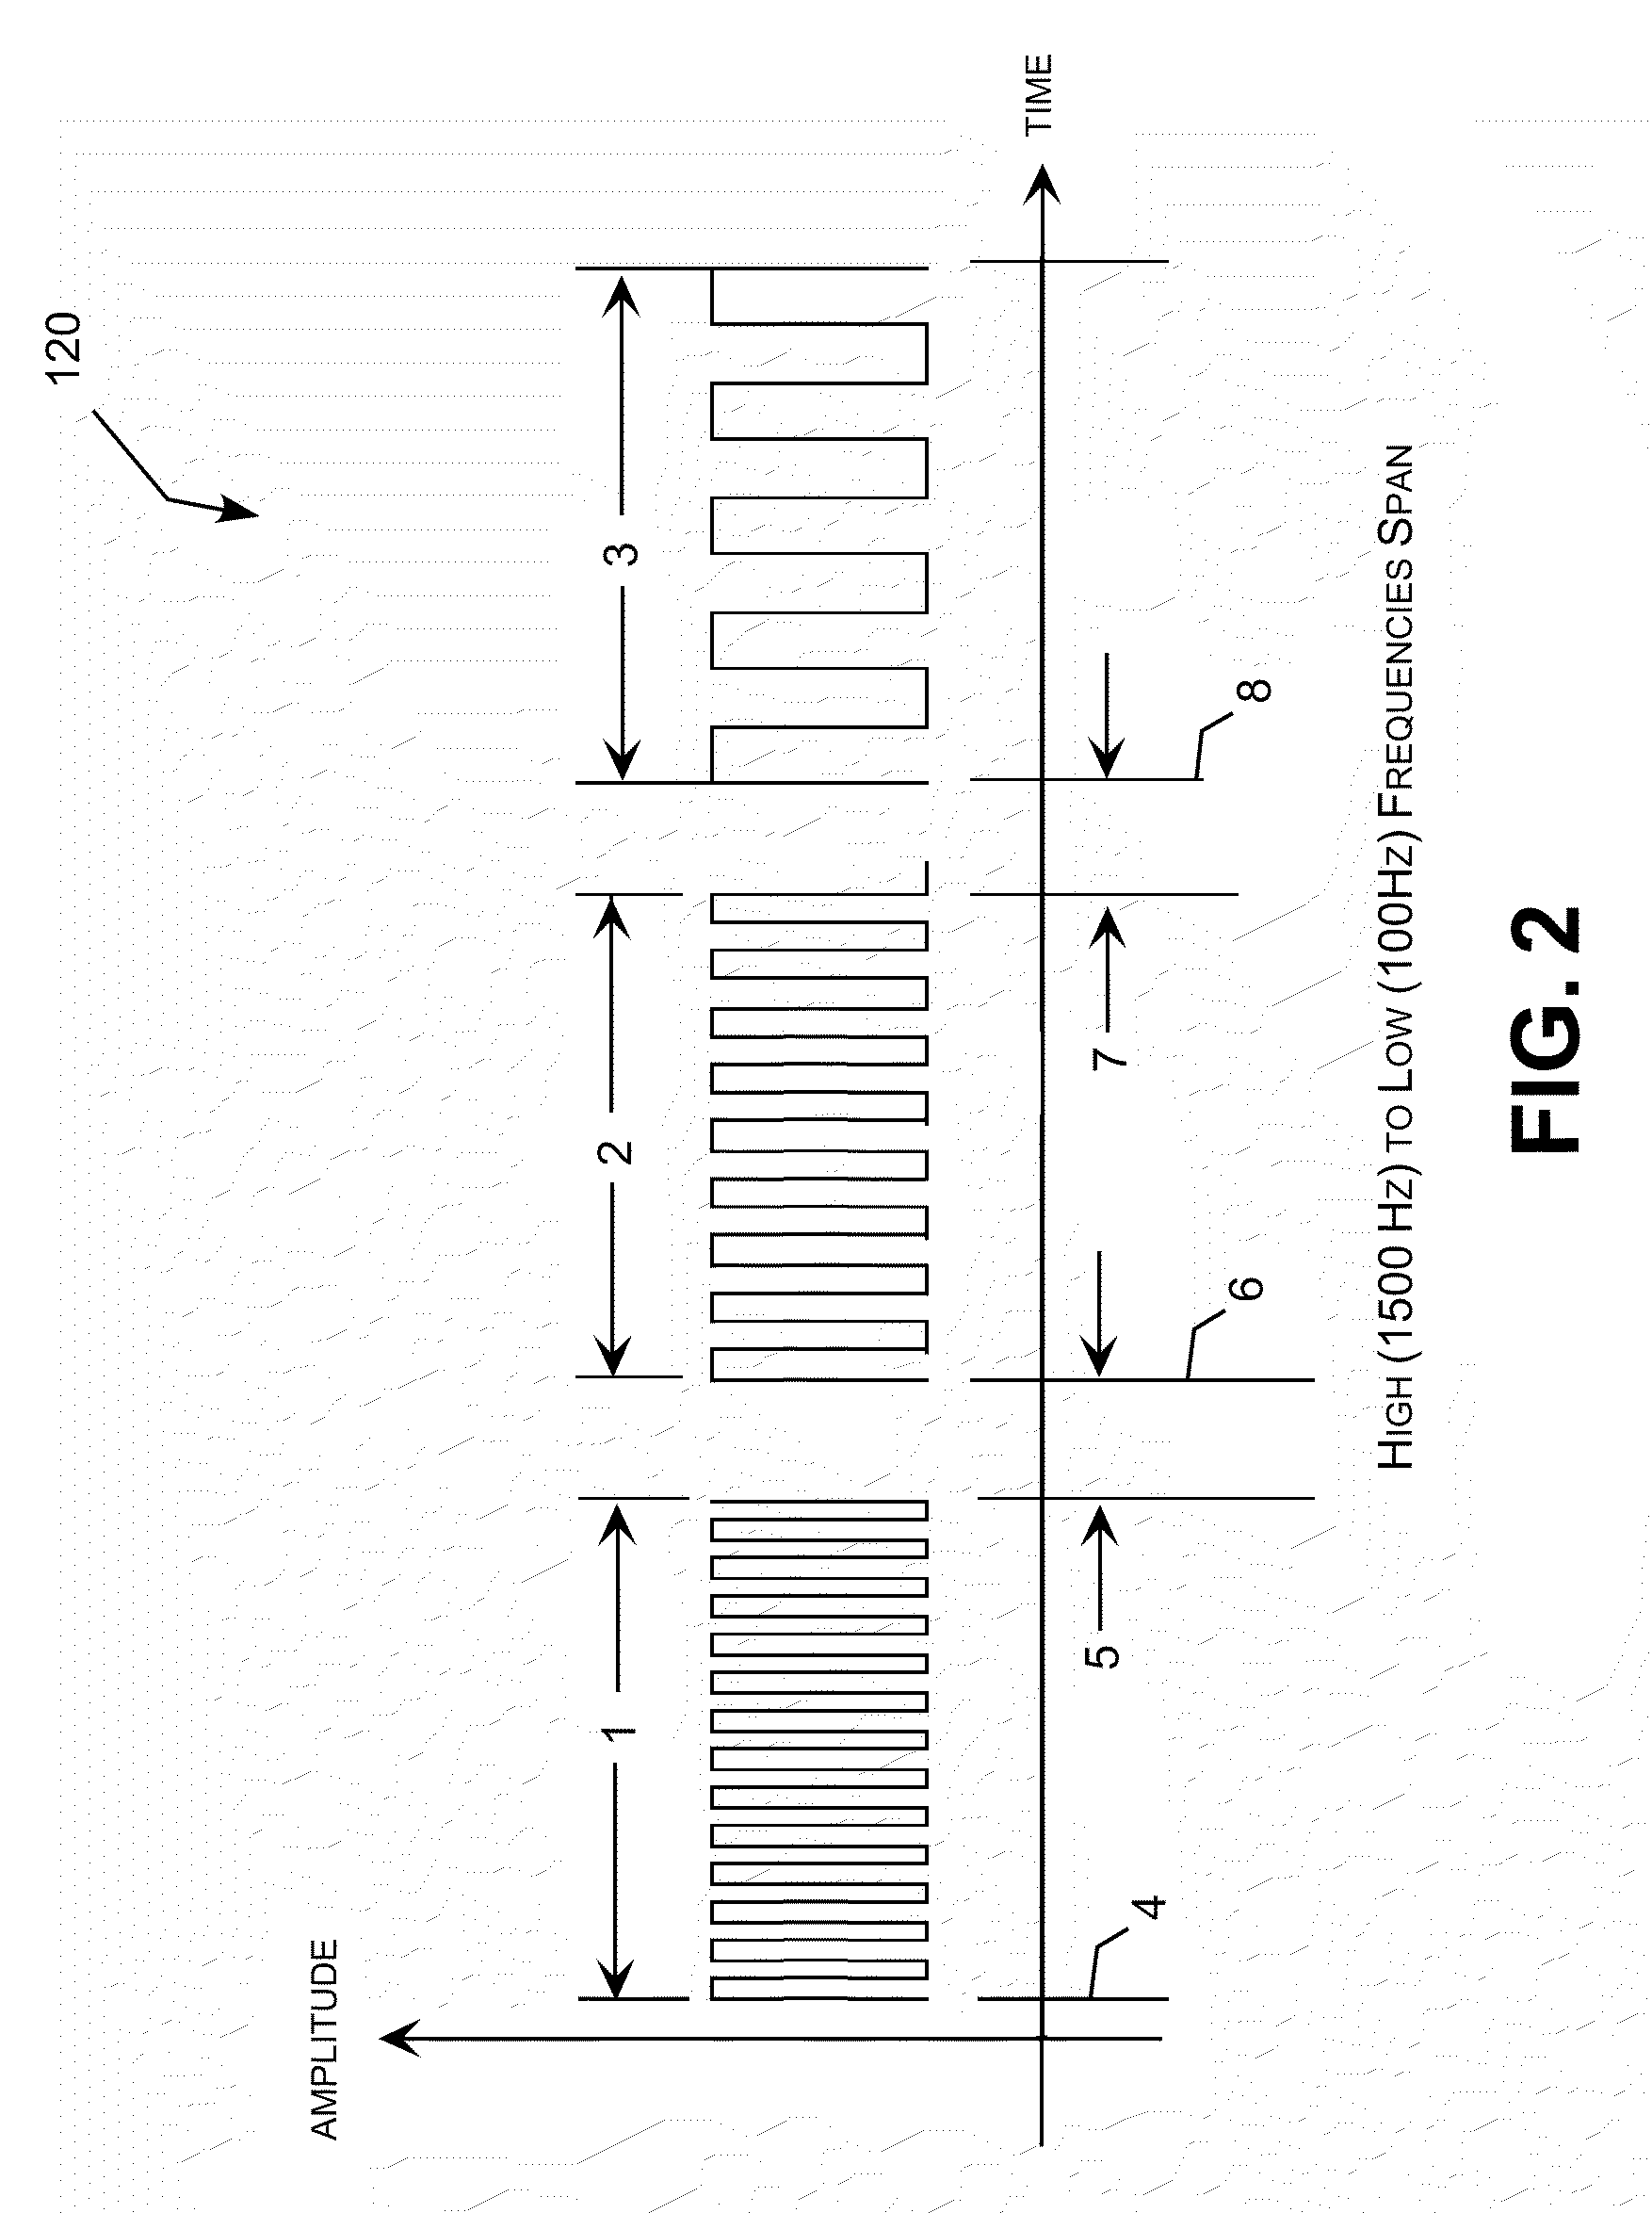 Method and Device for Using Vibroacoustical Stimulation to Treat Target Tissue Areas of Living Organisms